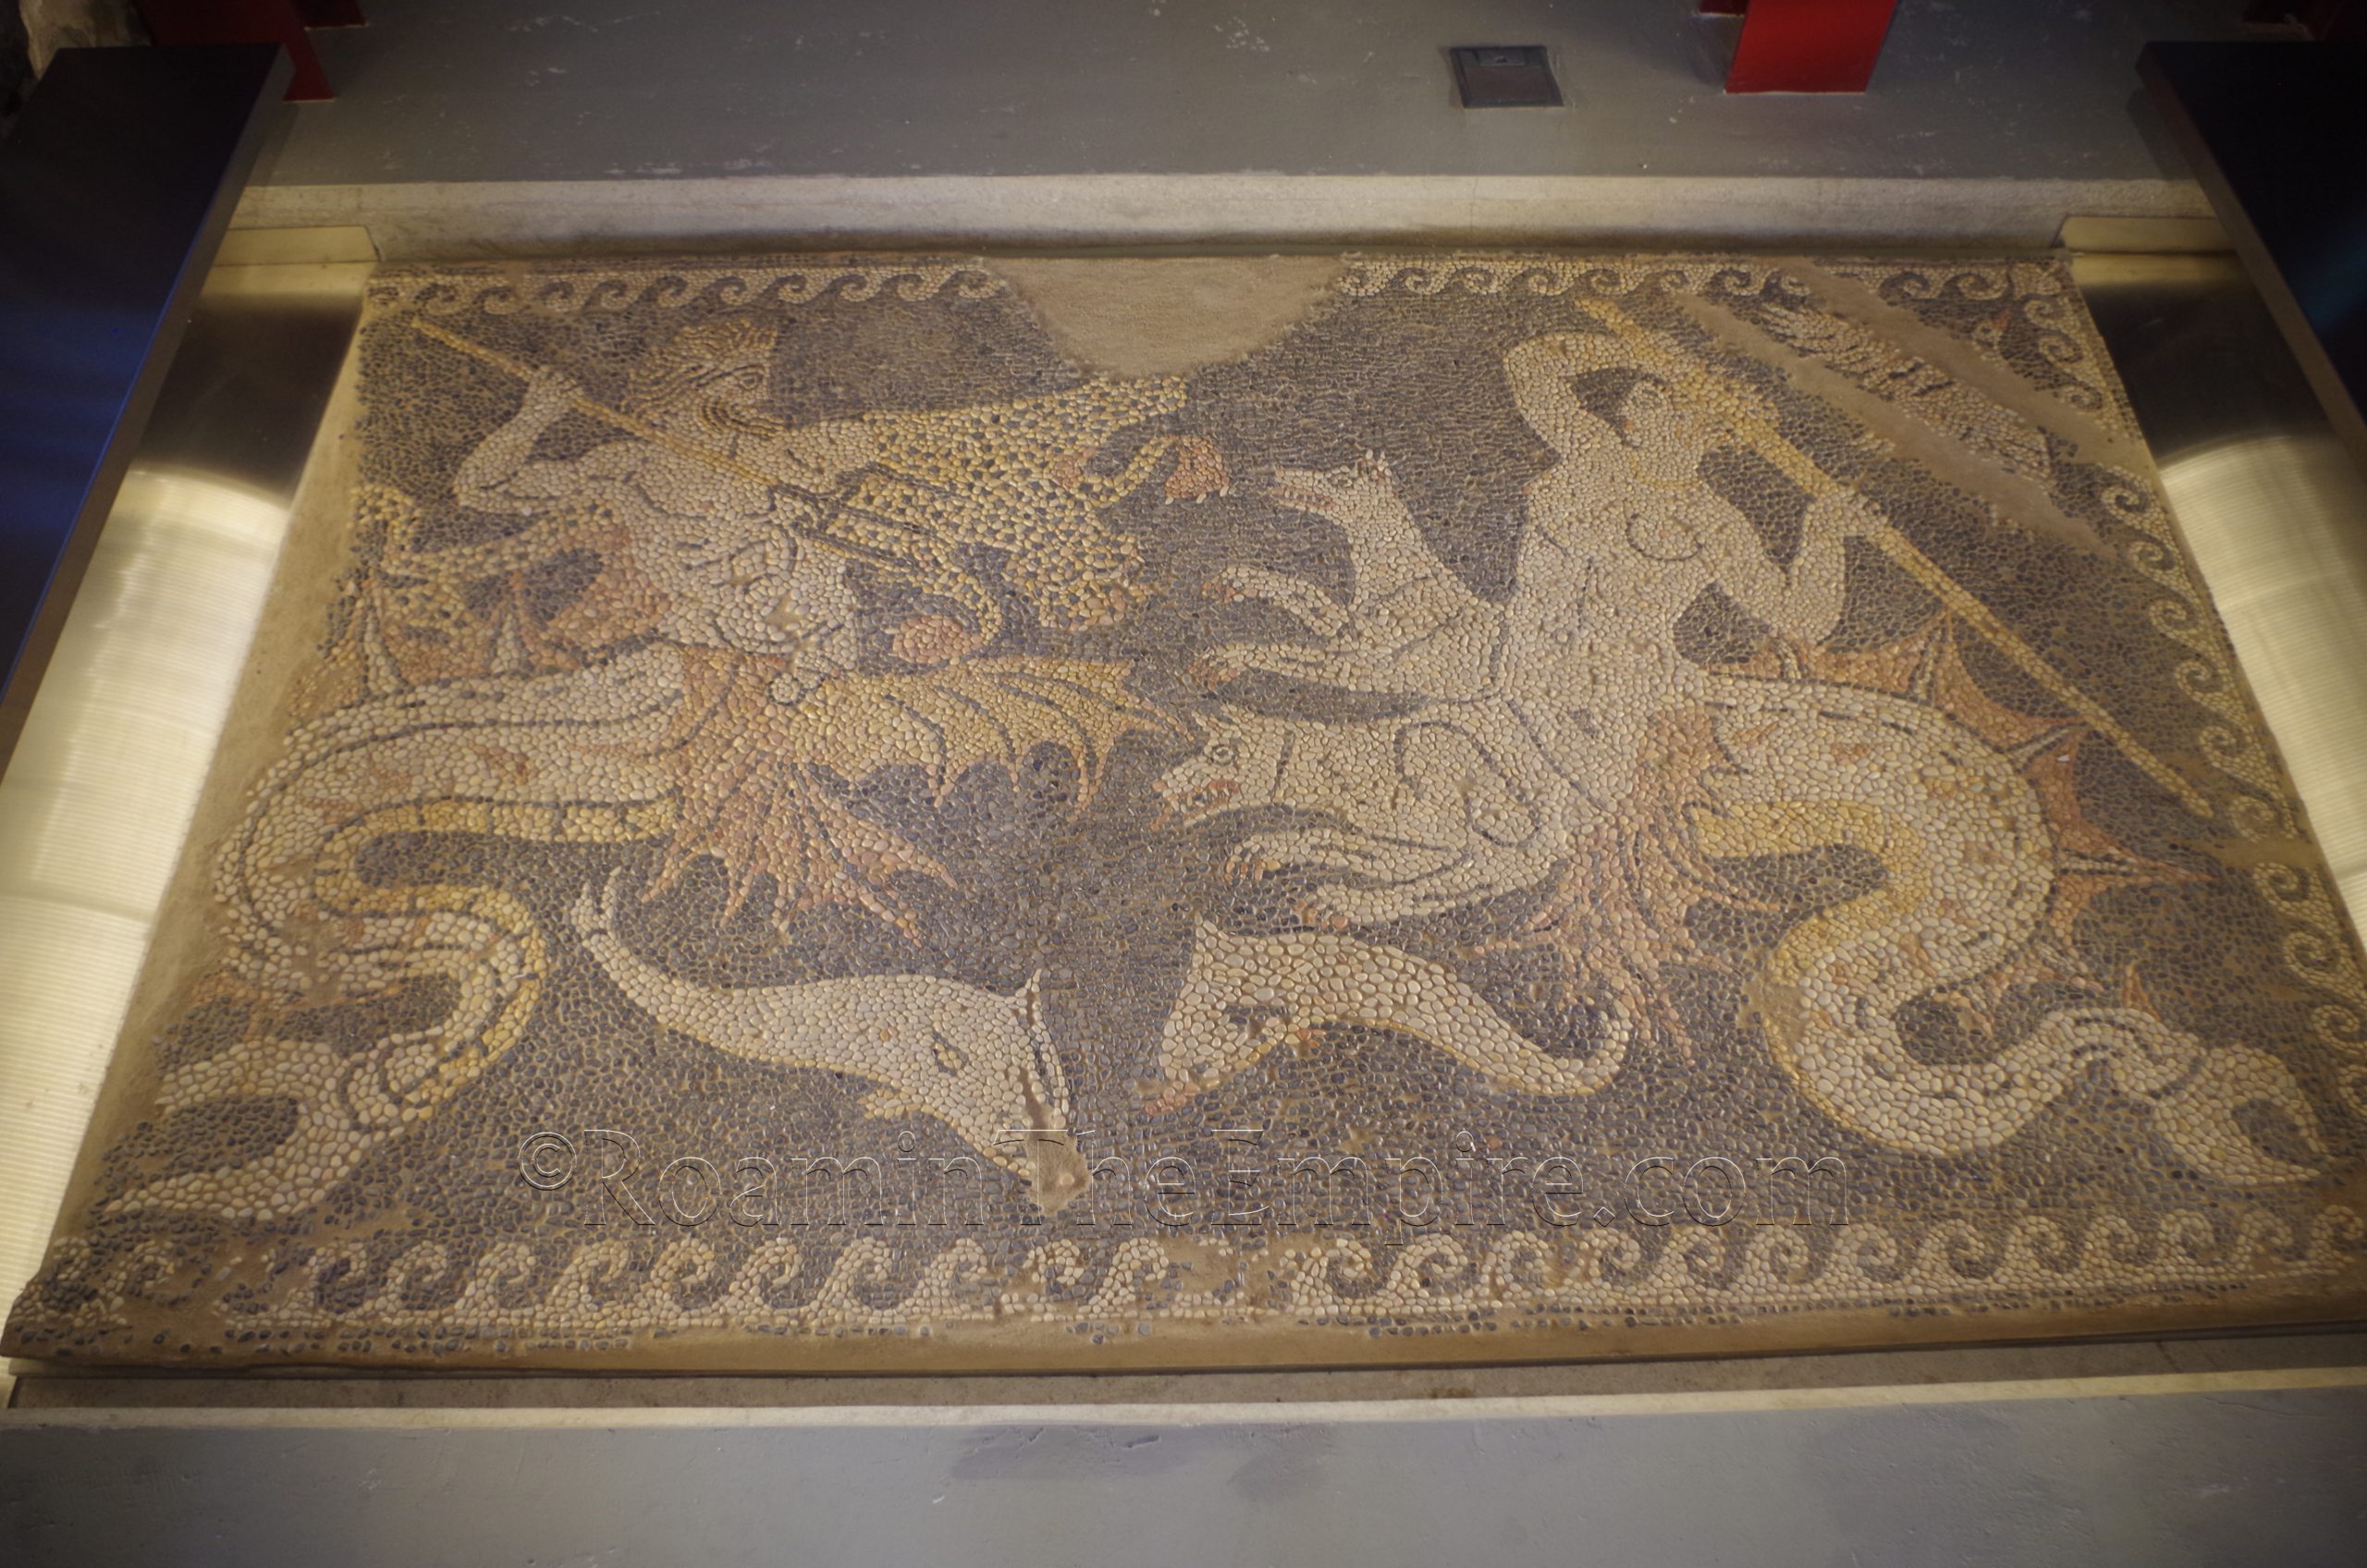 Pebble mosaic floor depicting a Triton fighting with Scylla. Dated to the 4th century BCE and found in Eretria. New Archaeological Museum of Chalkis "Arethousa."